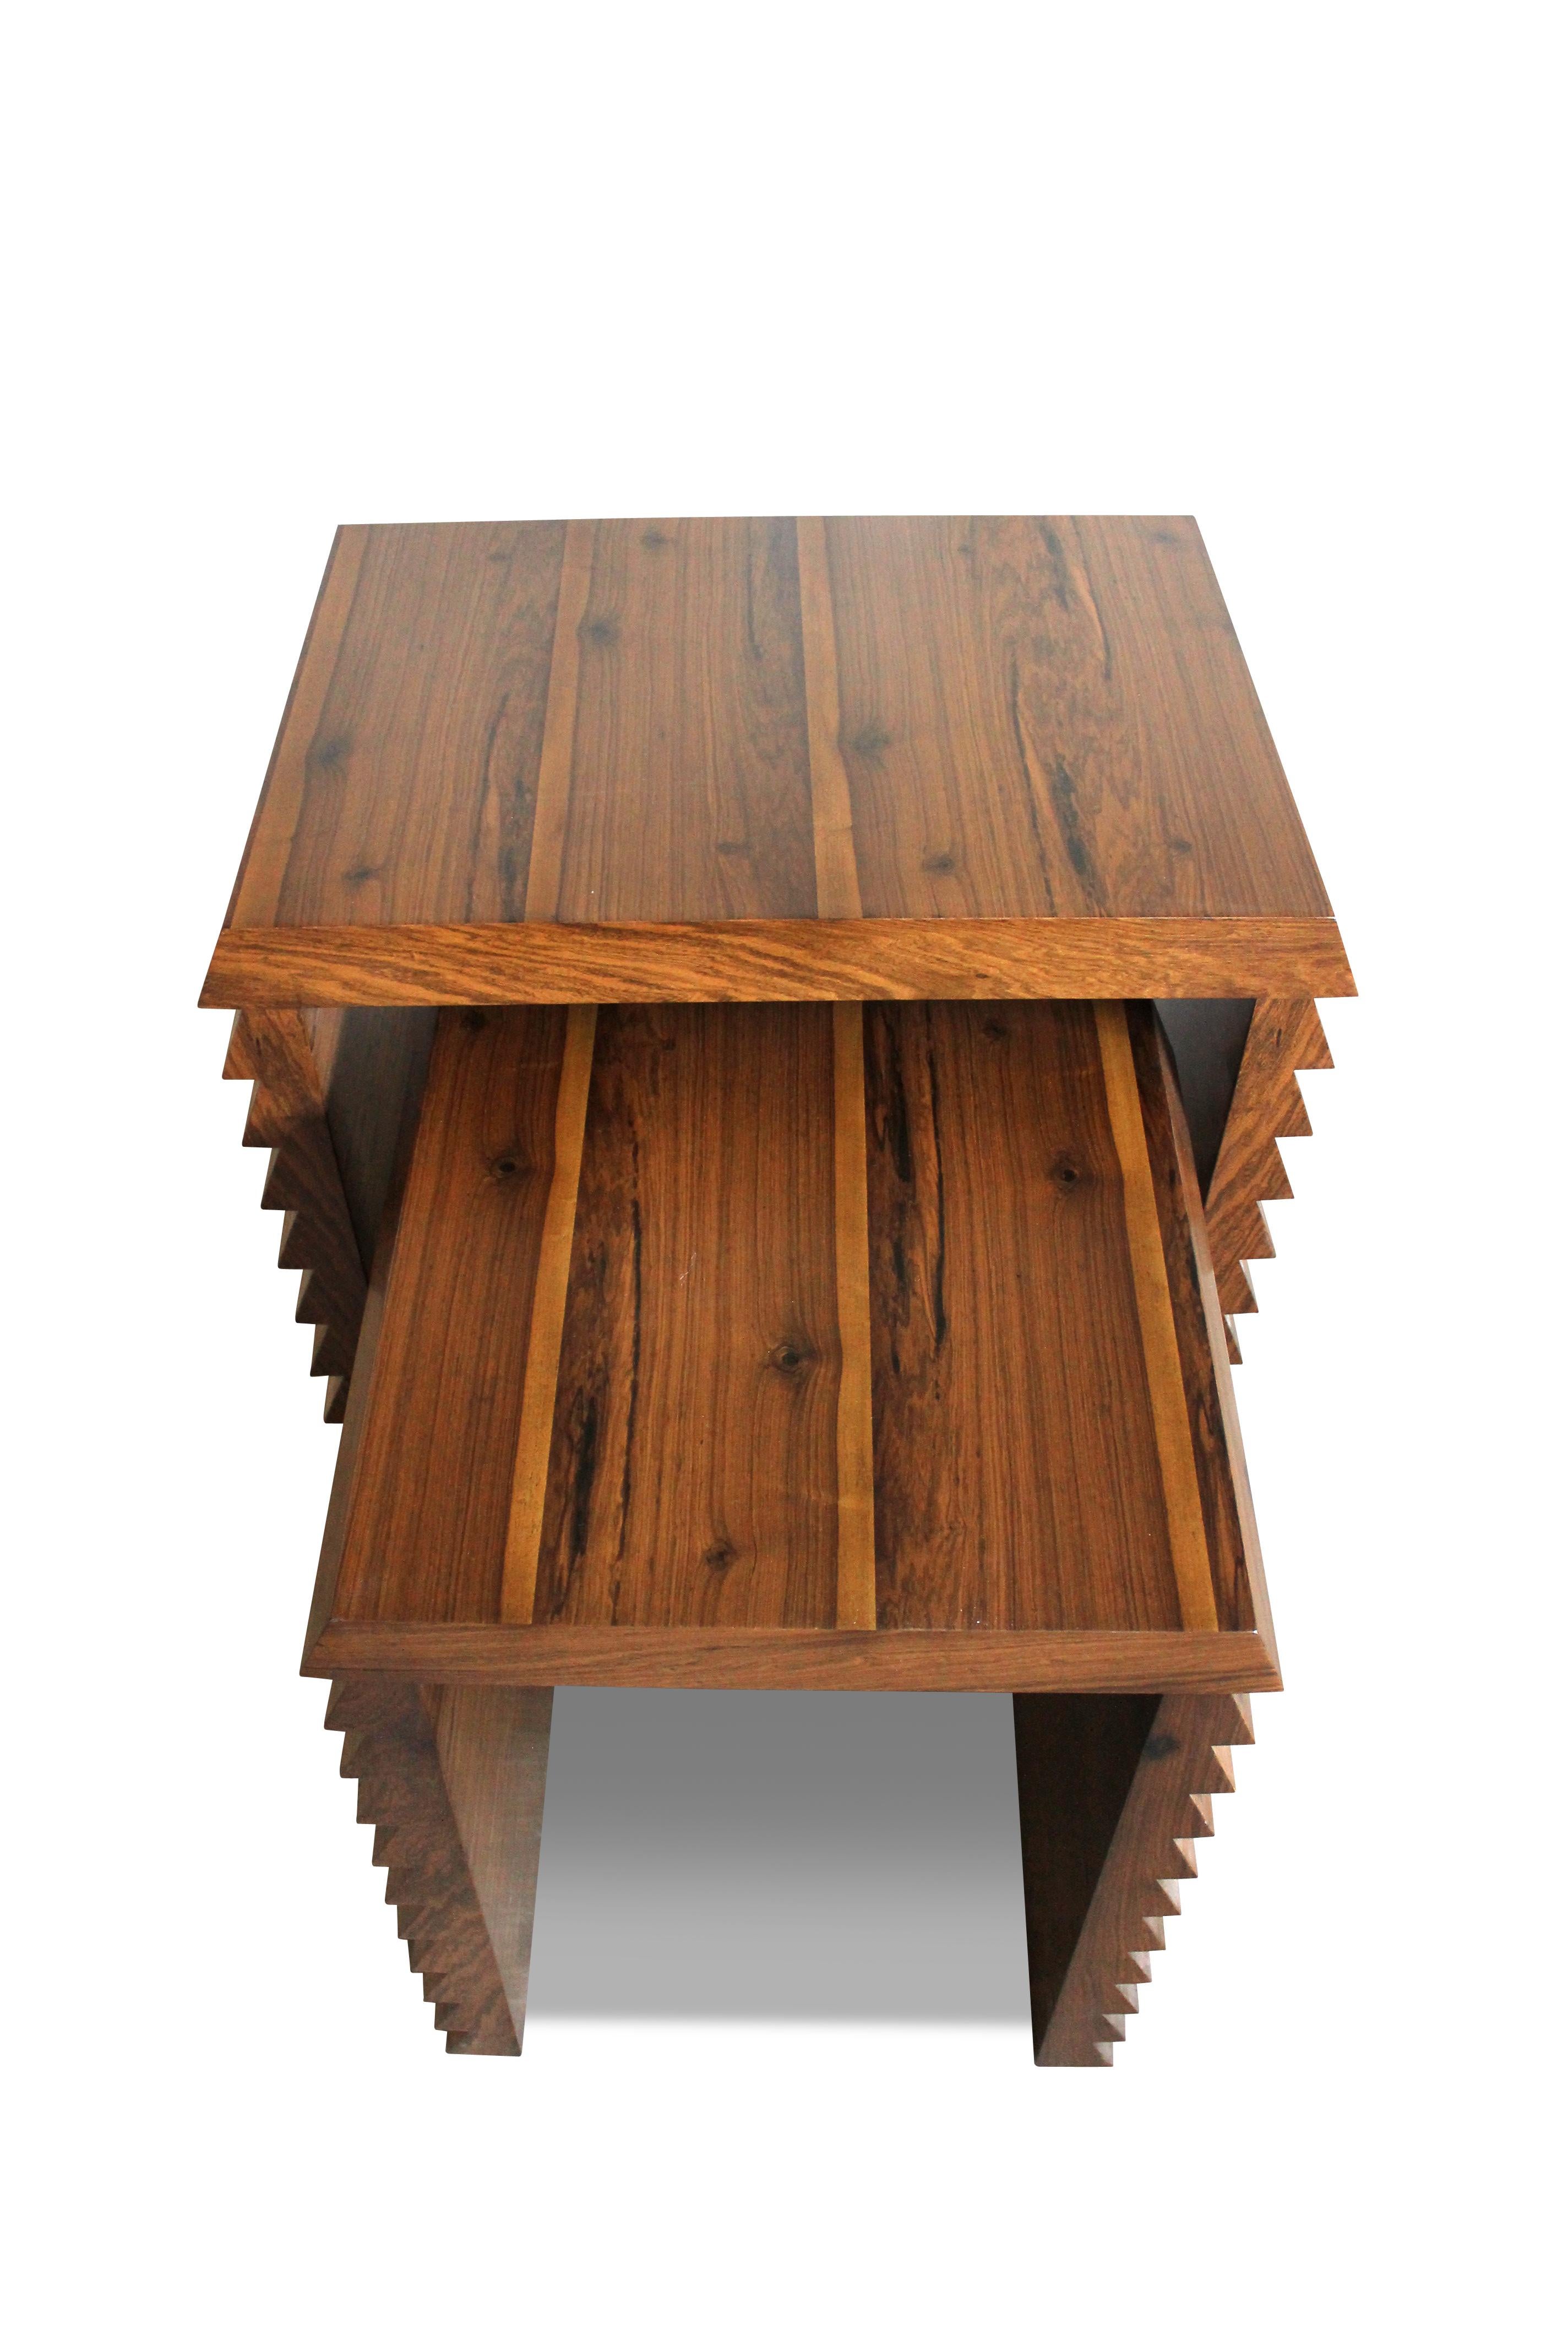 Contemporary Modern Nesting Tables in Argentine Rosewood by Costantini, Dorena For Sale 3